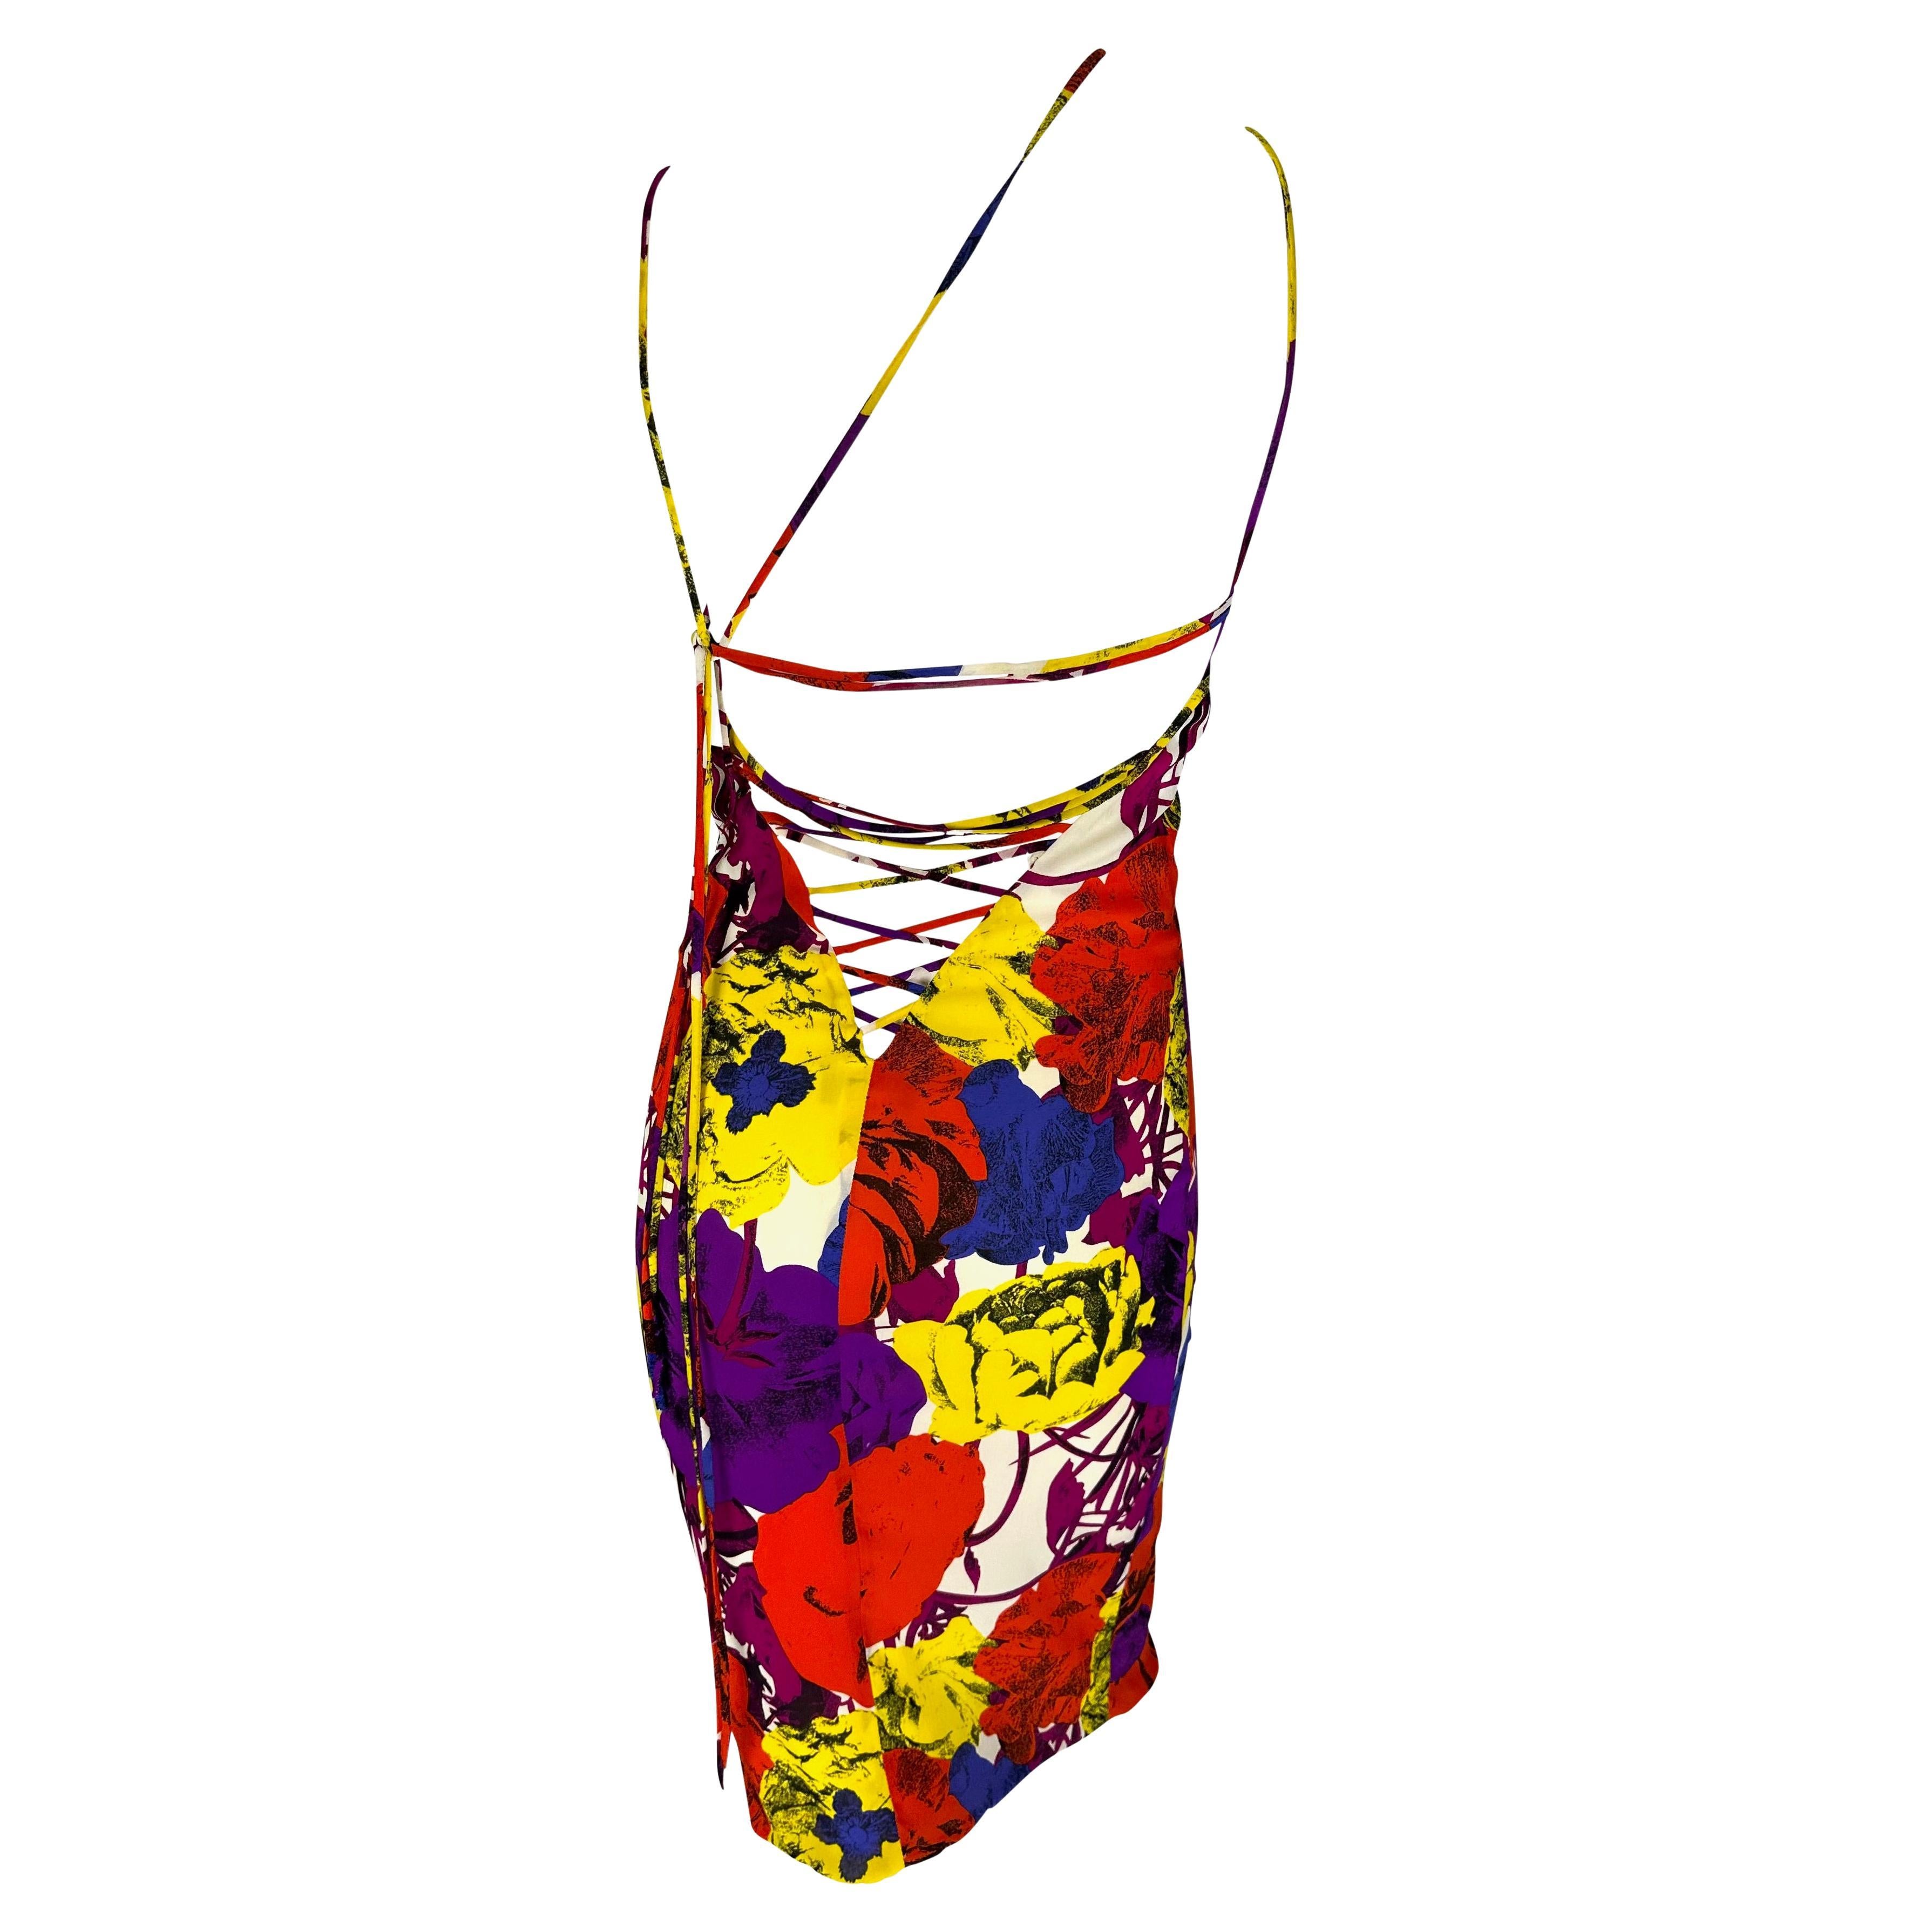 S/S 2002 Gianni Versace by Donatella Pop Art Floral Print Lace-Up Backless Dress For Sale 3